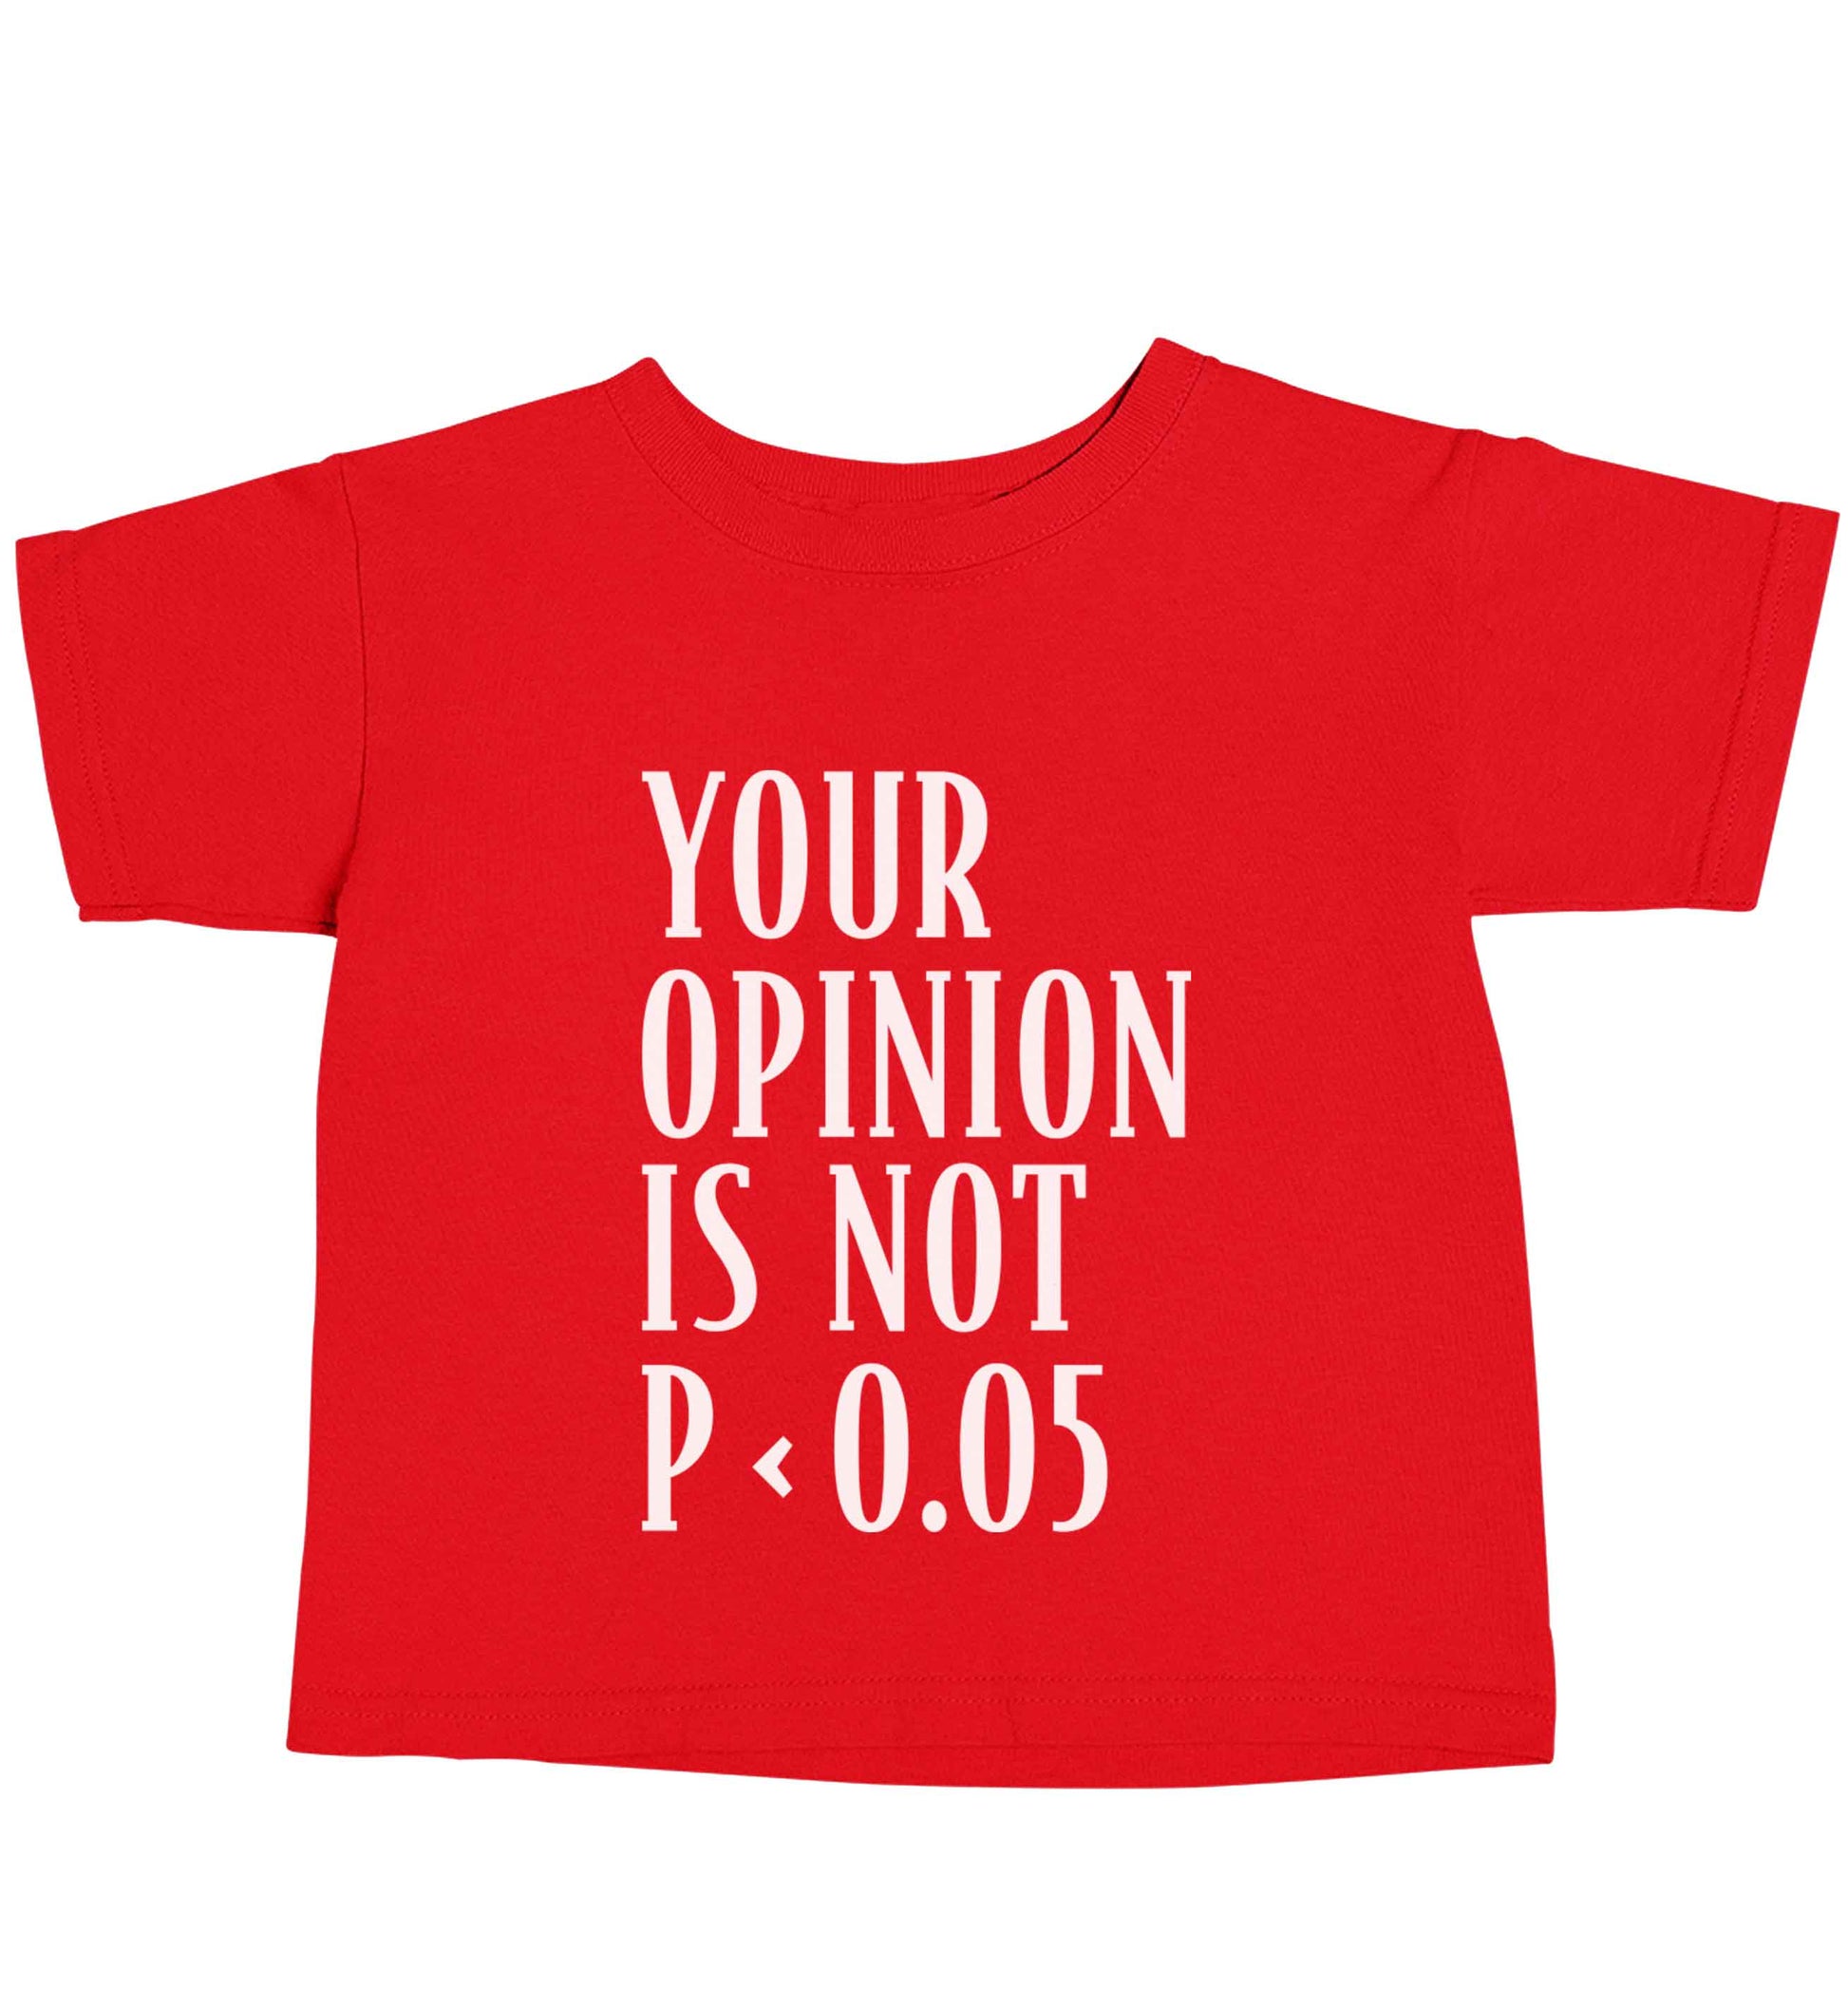 Your opinion is not P < 0.05red baby toddler Tshirt 2 Years